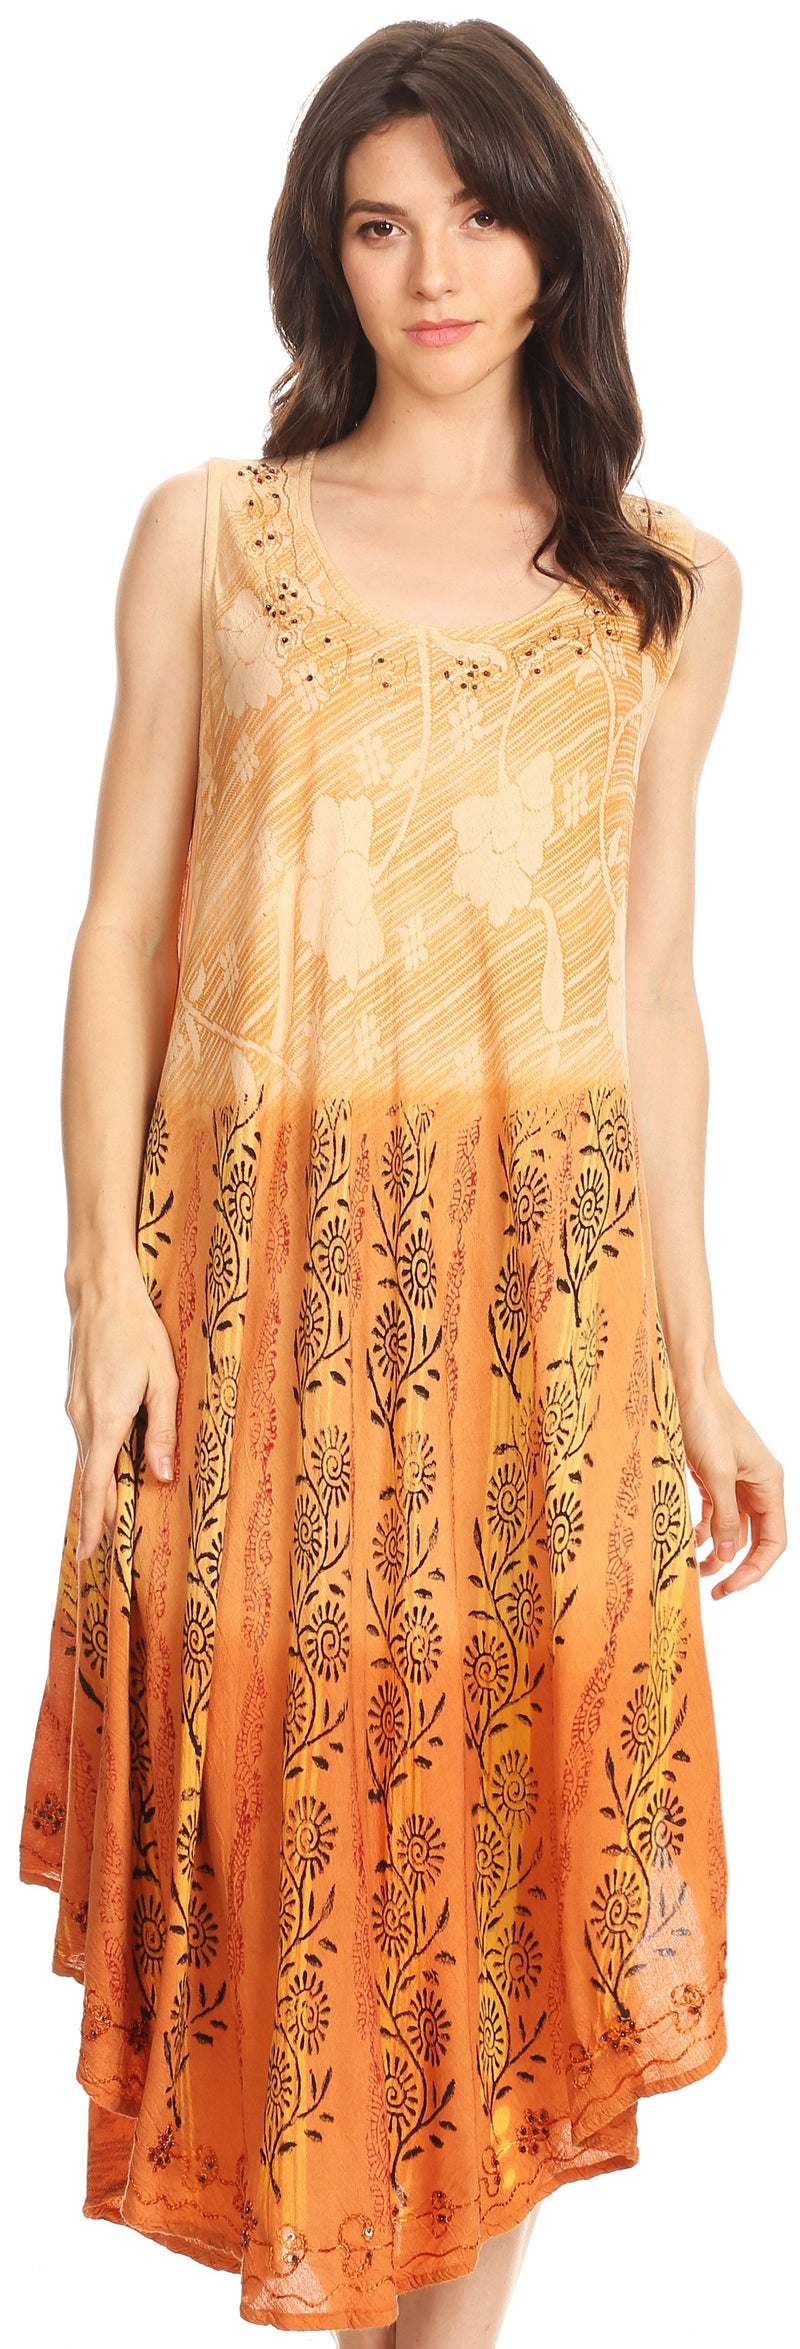 Sakkas Alicia Ombre Vine Print Batik Dress / Cover Up with Sequins and Embroidery